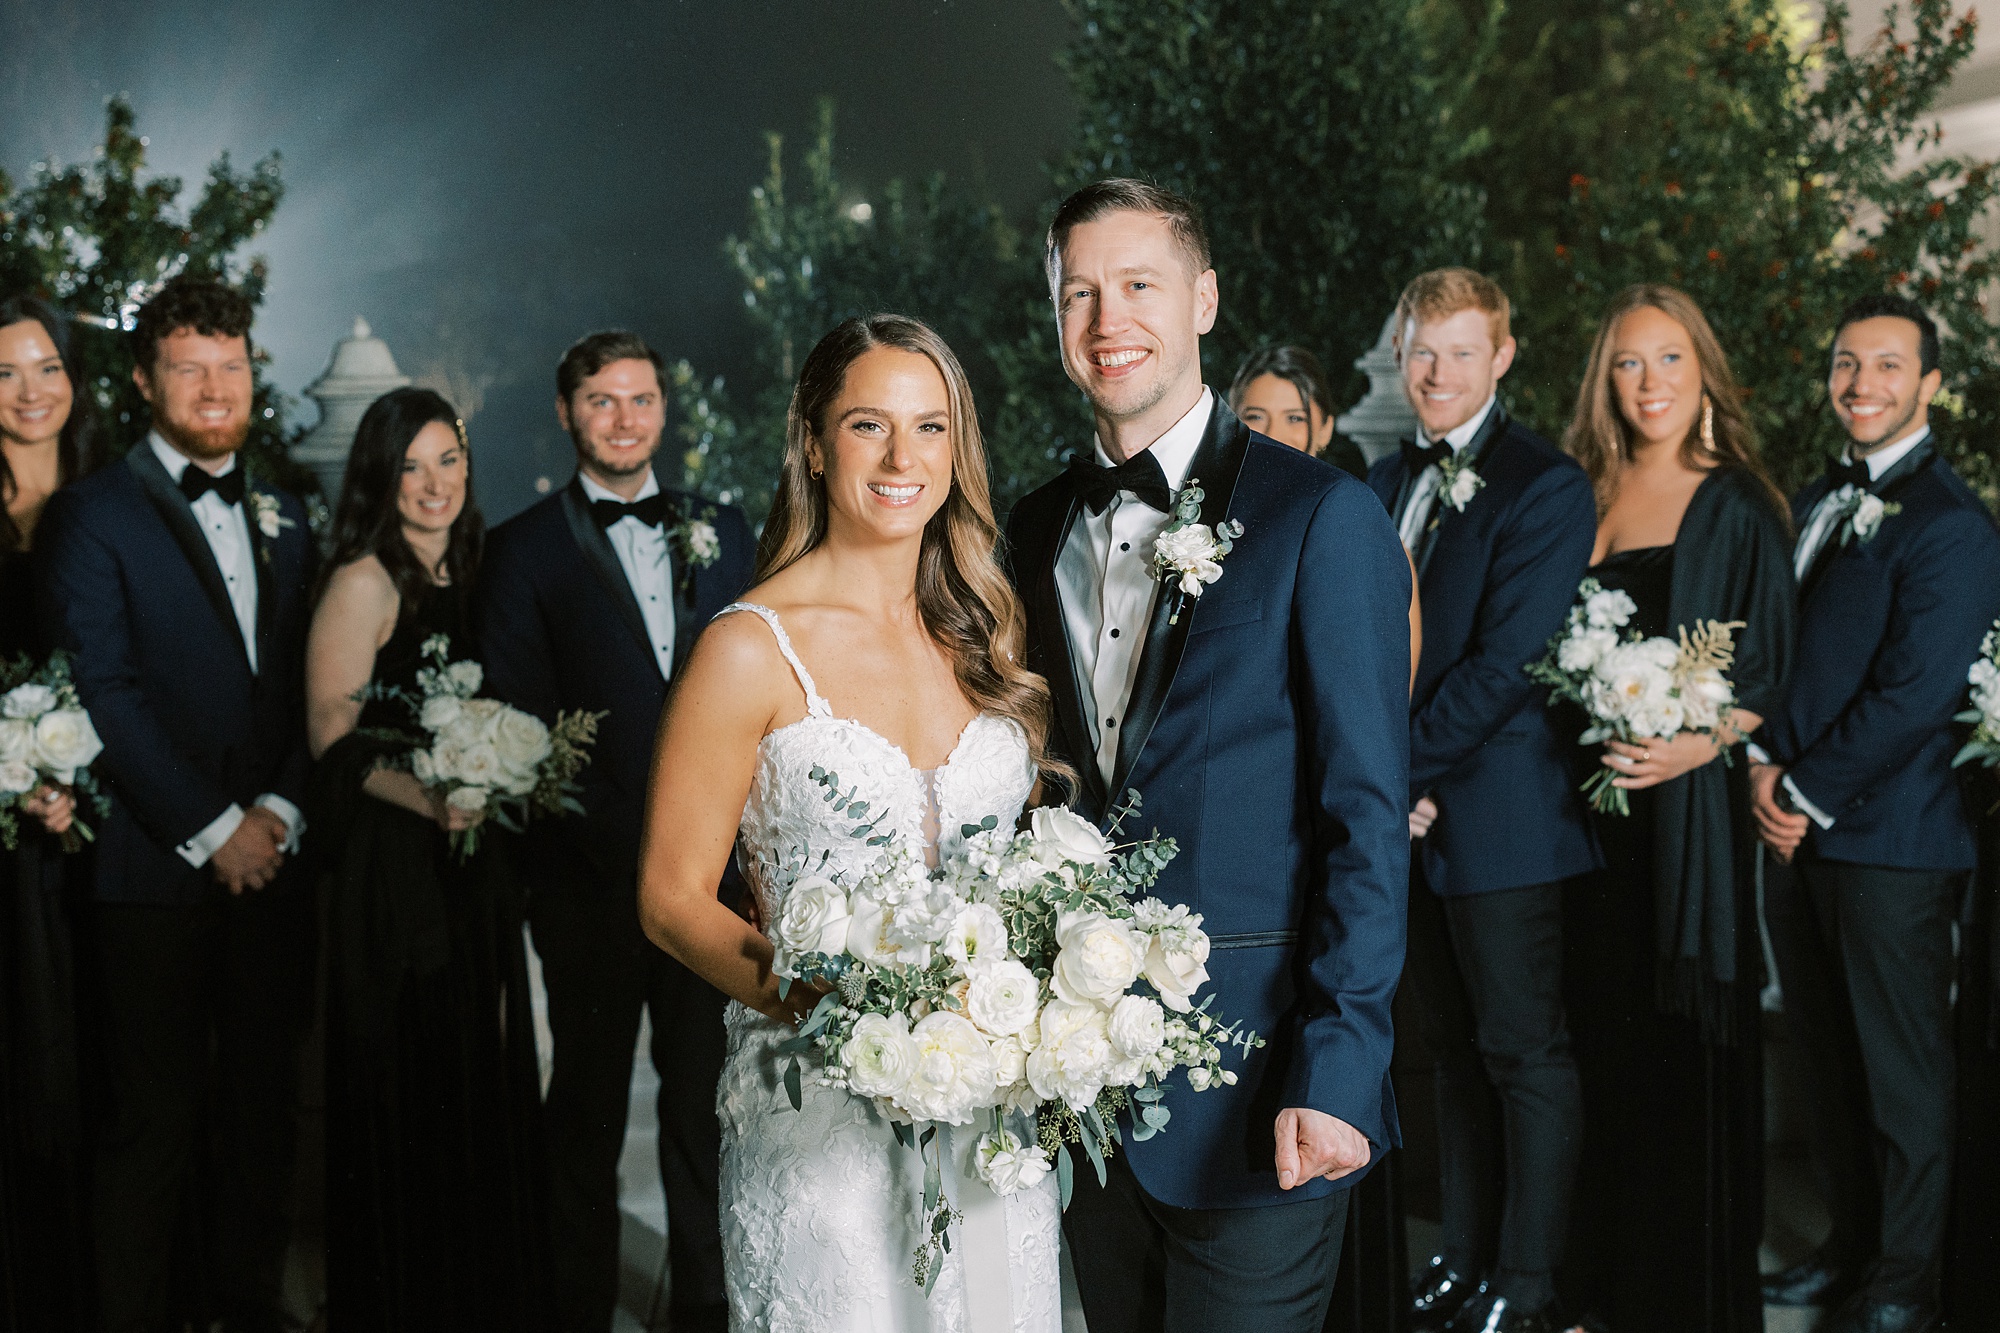 newlyweds stand together in front of wedding party in black dresses and blue suits